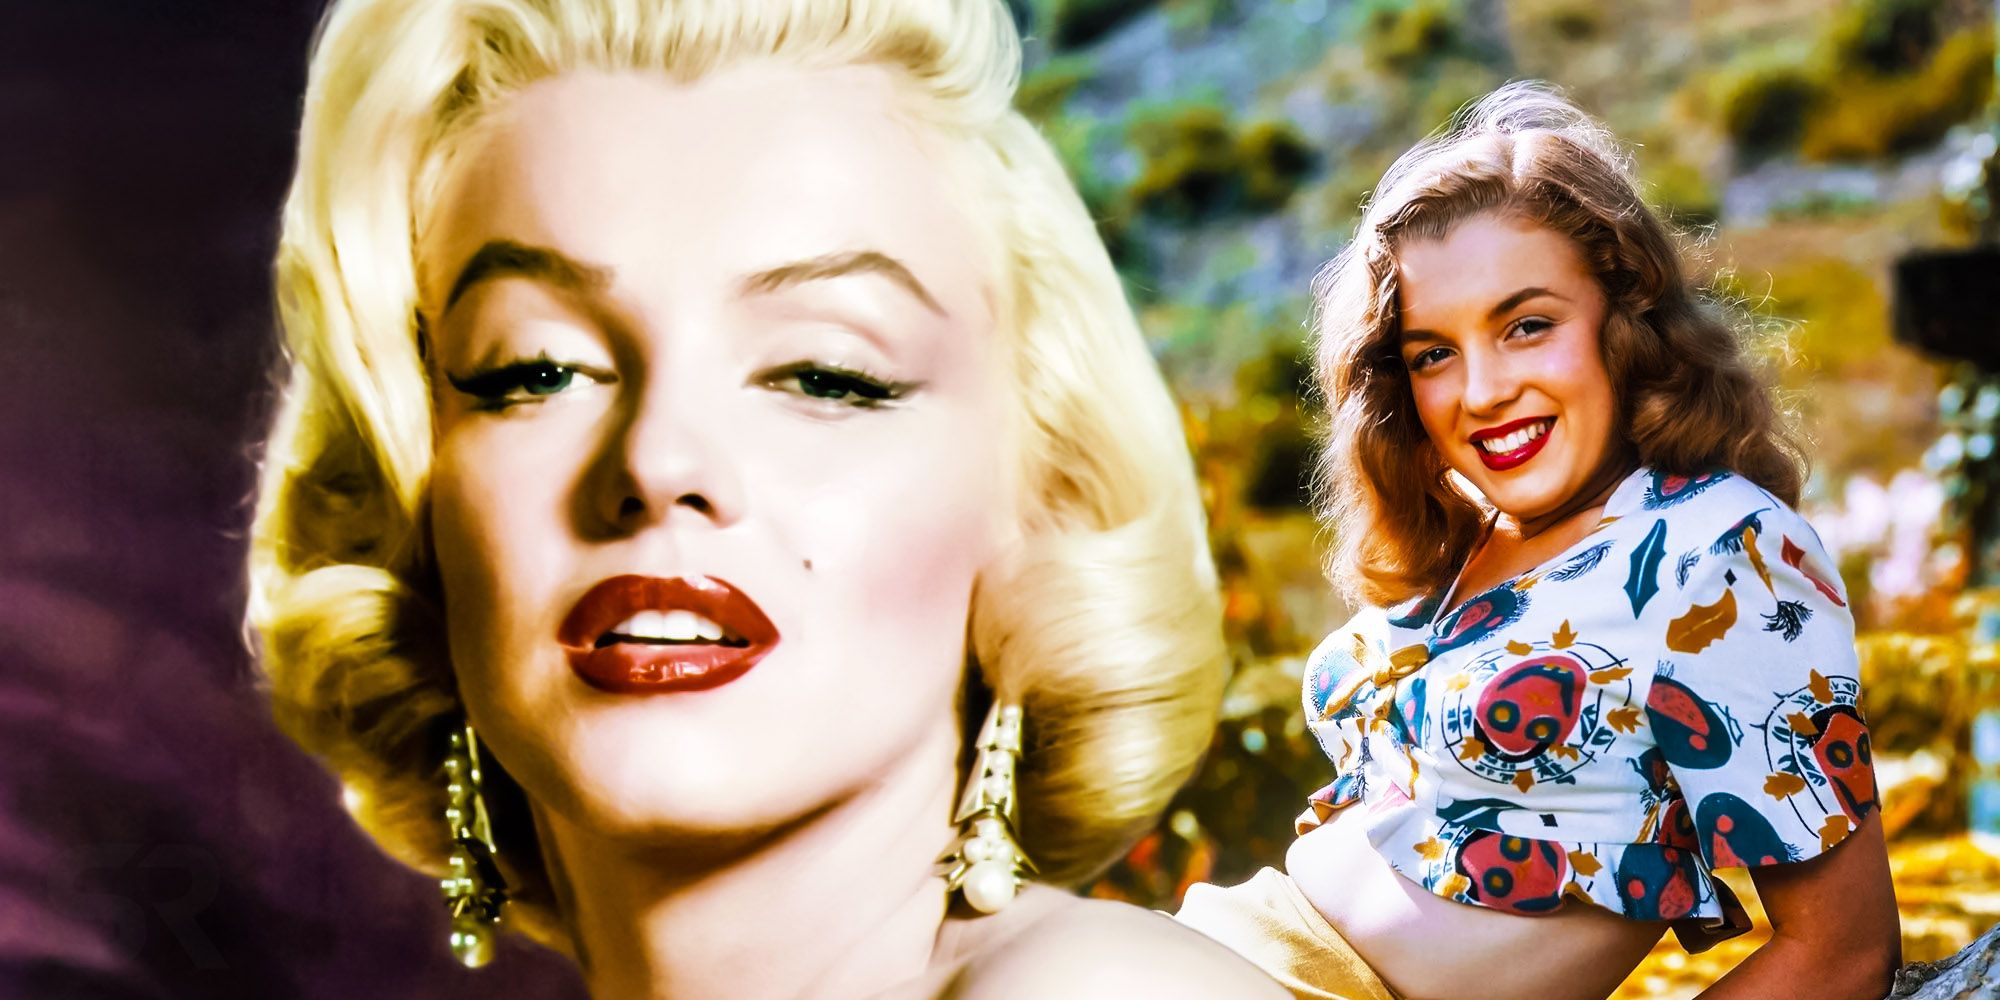 How Did Marilyn Monroe Get Her Name? This Photo Reveals the Story